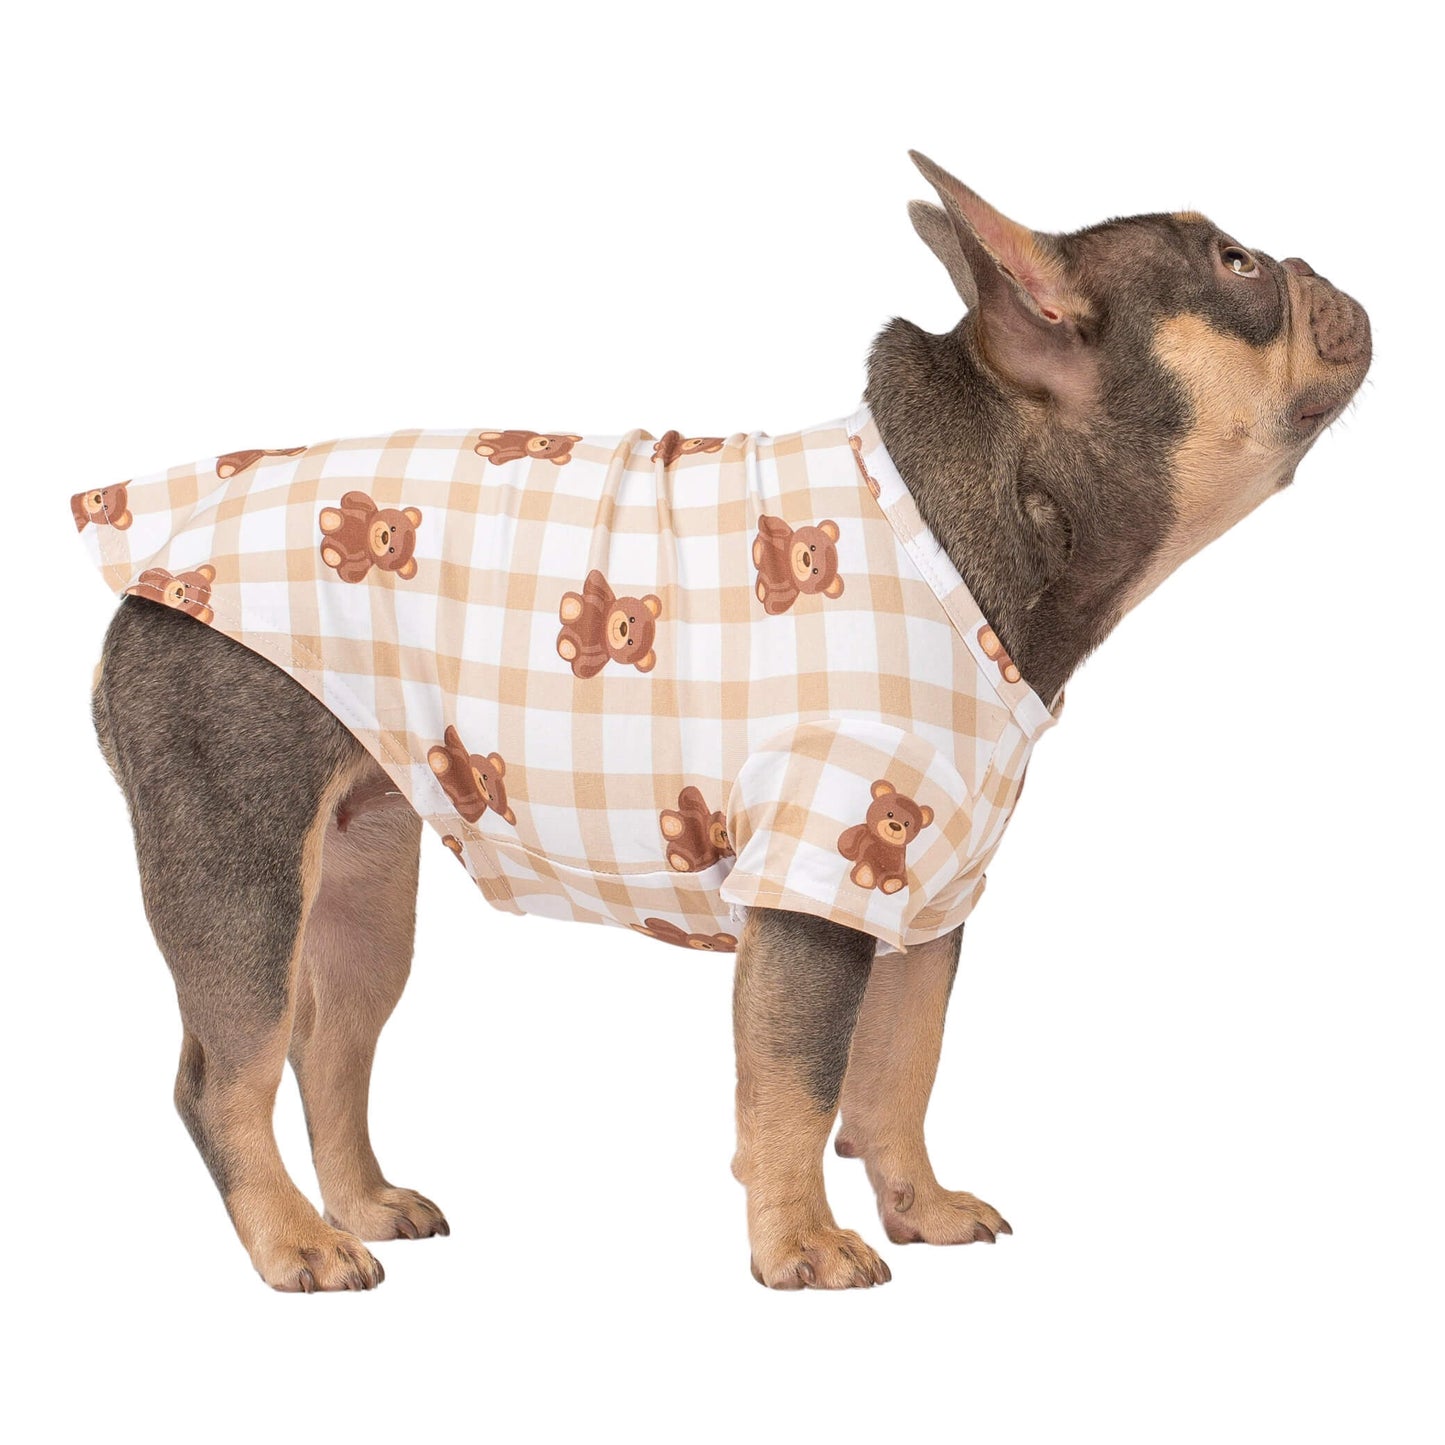 A Lilac Tan French Bulldog standing while wearing Vibrant Hounds Teddy Bear clothing for dogs. It is a Brown GIngham print with Teddy Bears printed on it.